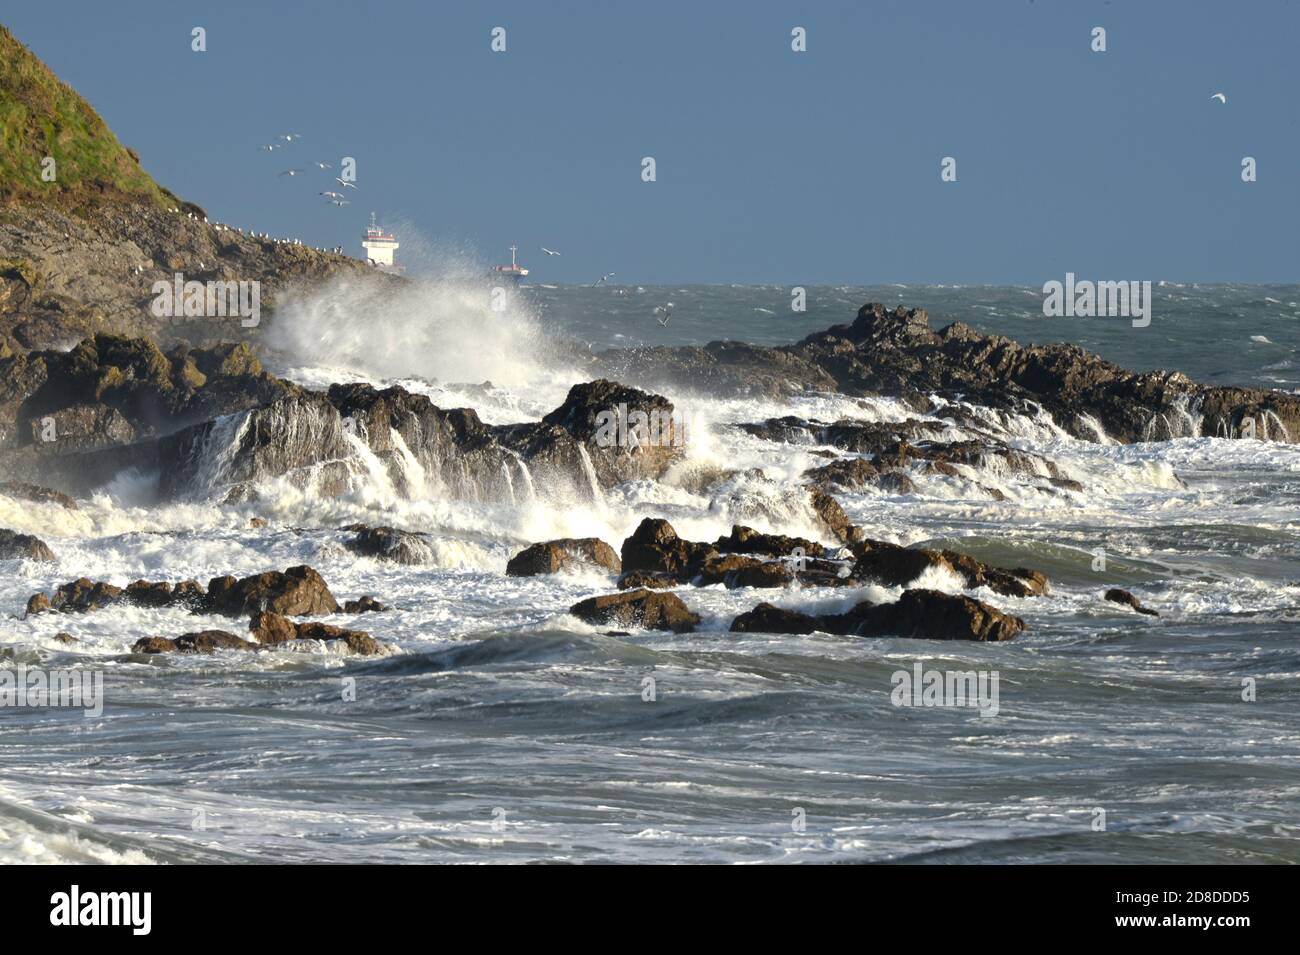 Large wave surges over the rocks on this headland on Gower sending torrents of of water onto the land. A ship rides the storm in the background Stock Photo